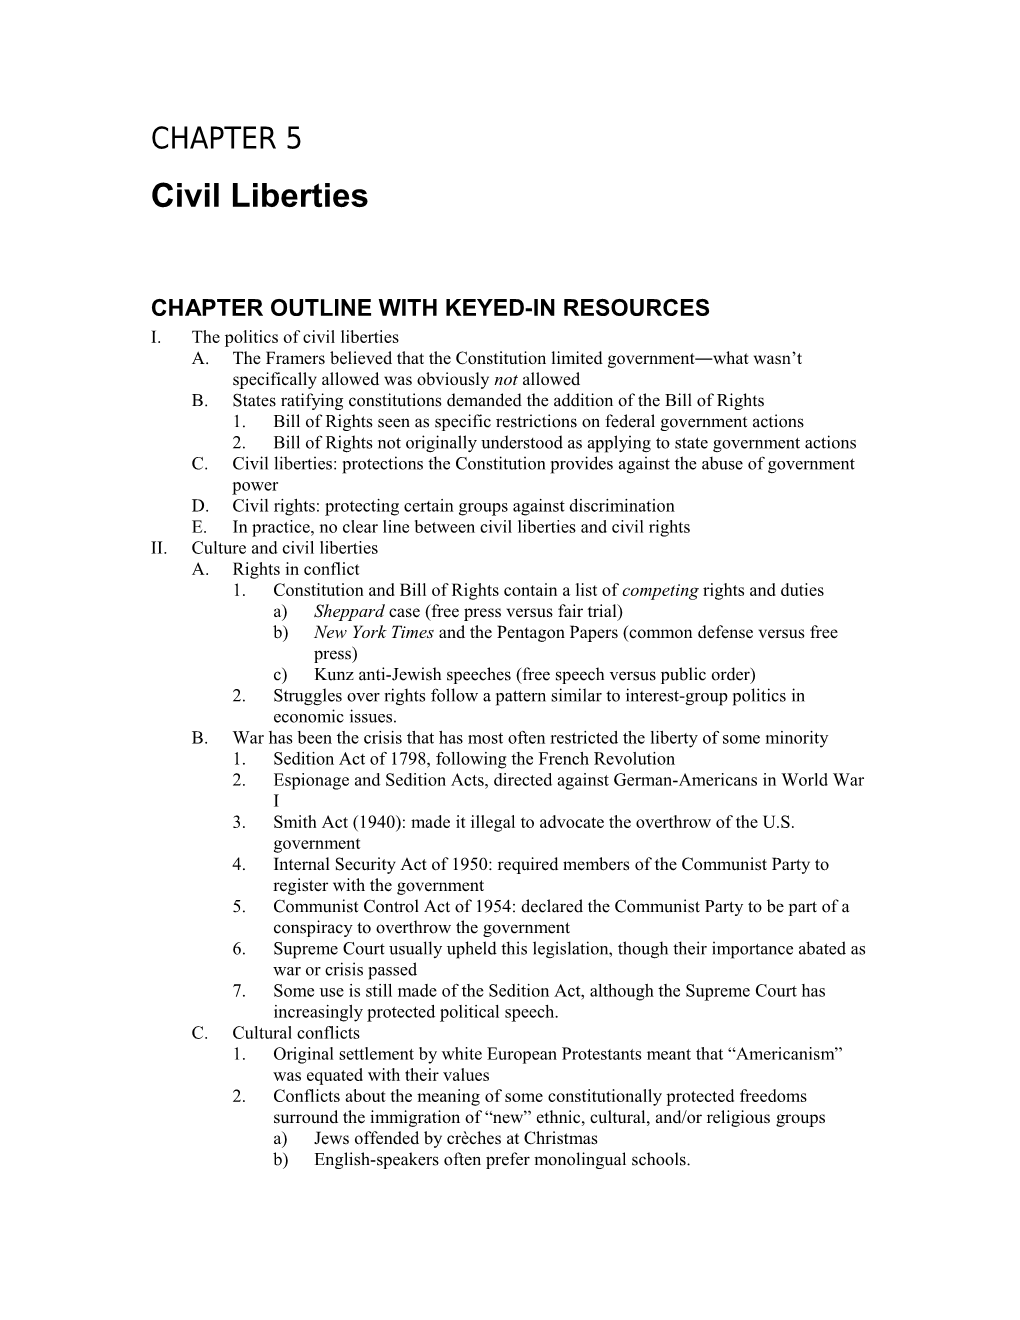 Chapter Outline with Keyed-In Resources